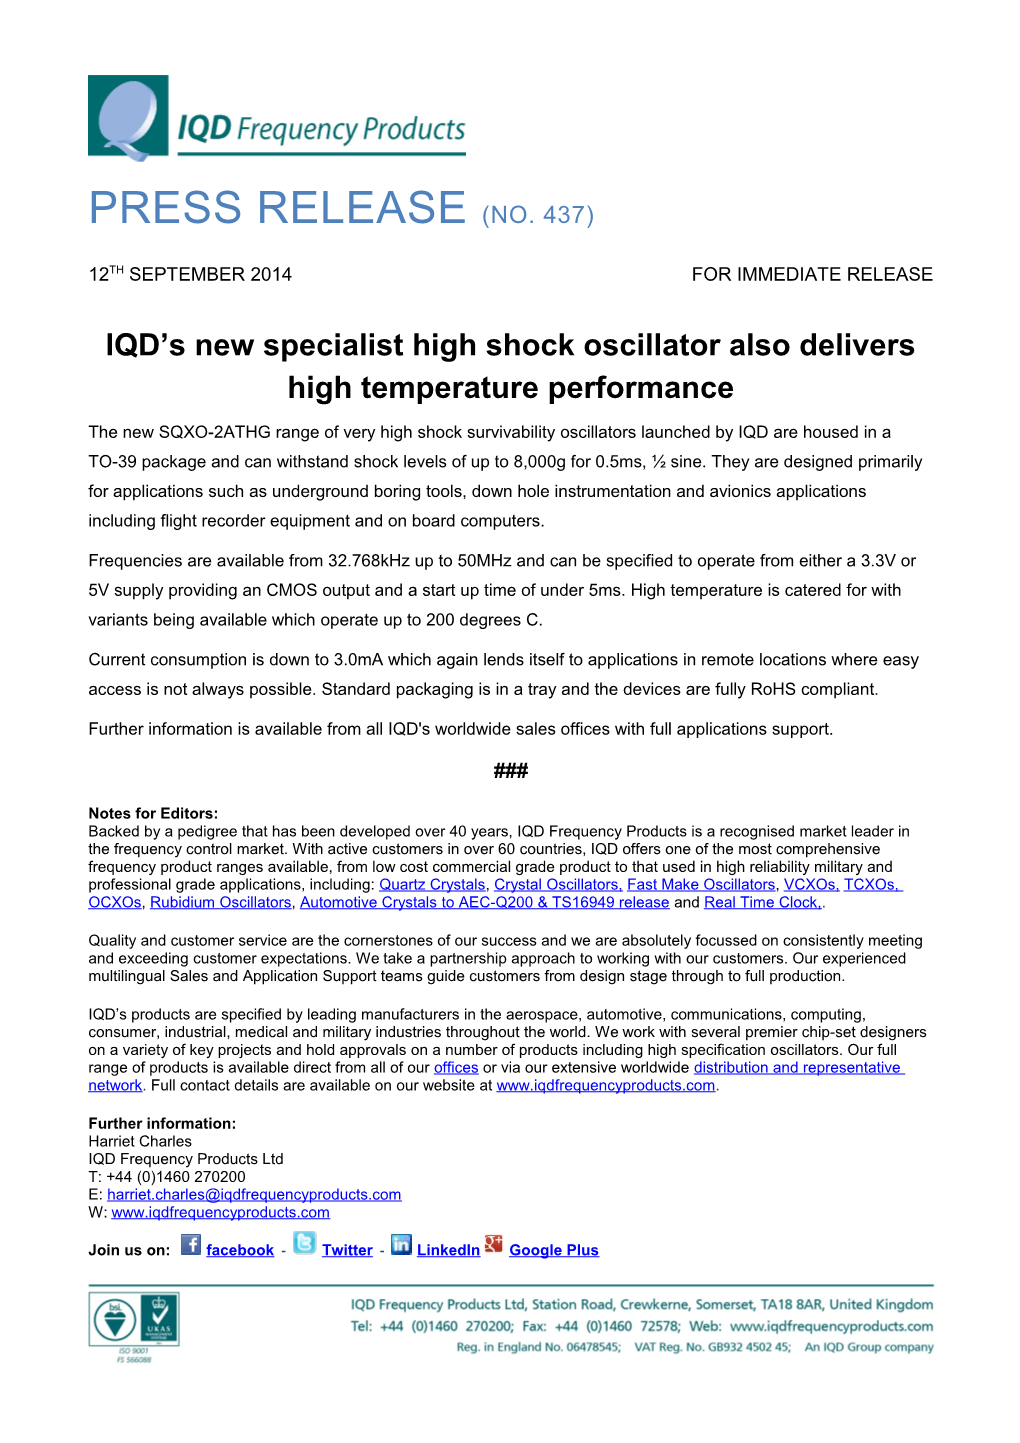 IQD S New Specialist High Shock Oscillator Also Delivers High Temperature Performance